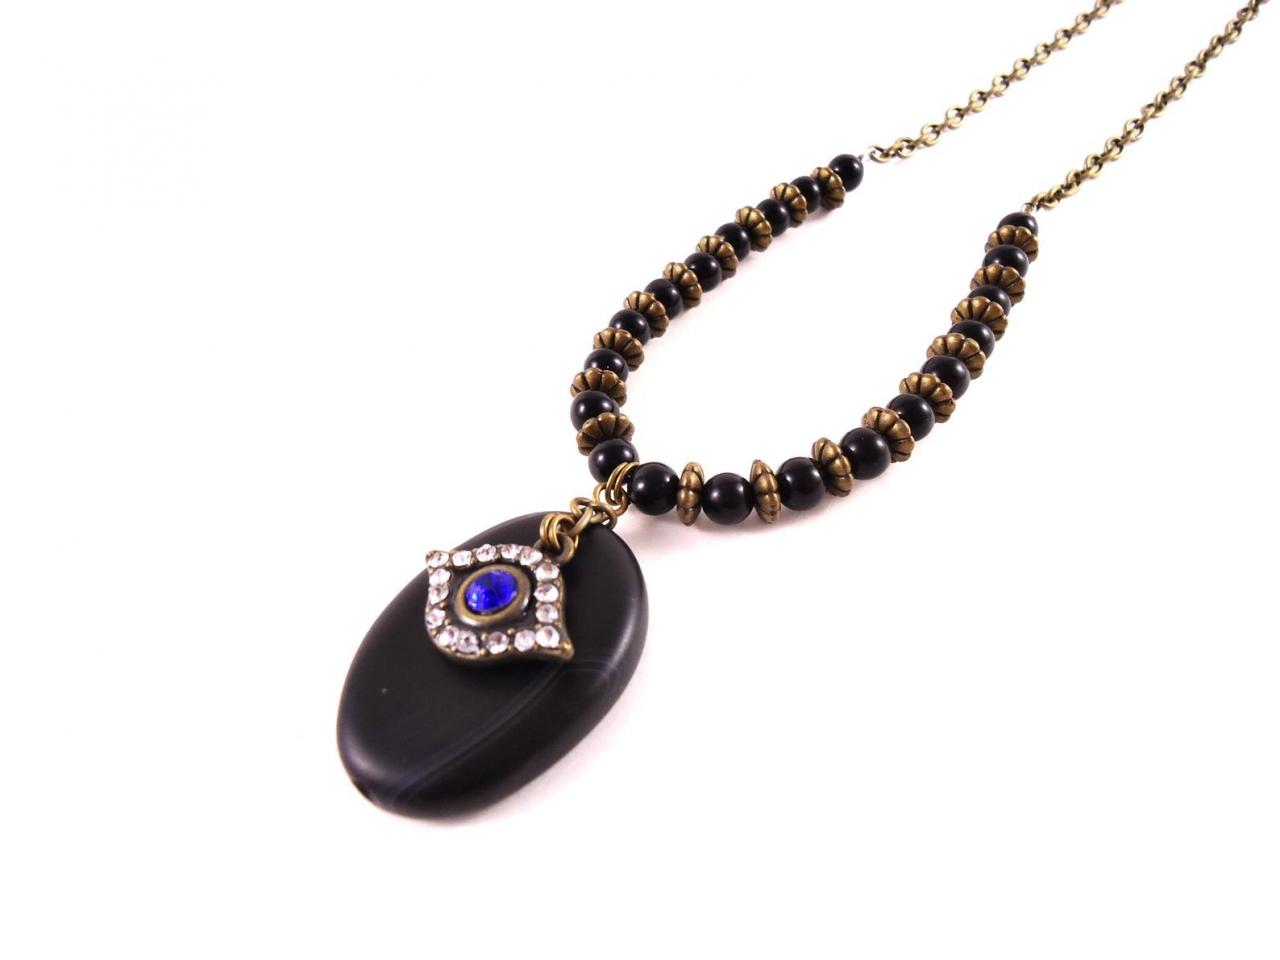 Evil Eye Jewelry - Black Agate Necklace - Yoga Gift For Her - Protection Jewelry